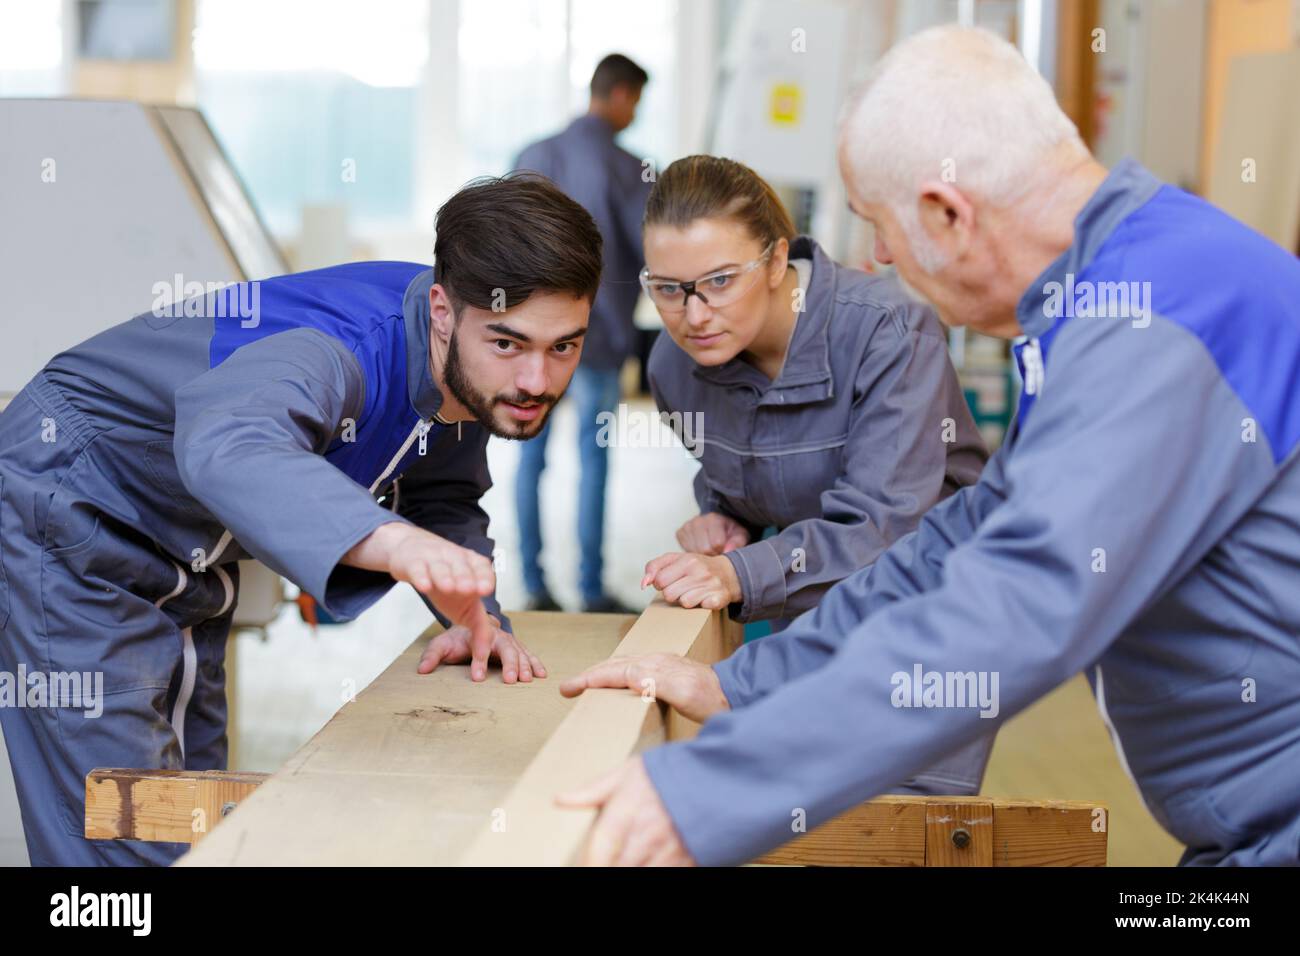 trainee carpenters discussing woodworking project Stock Photo